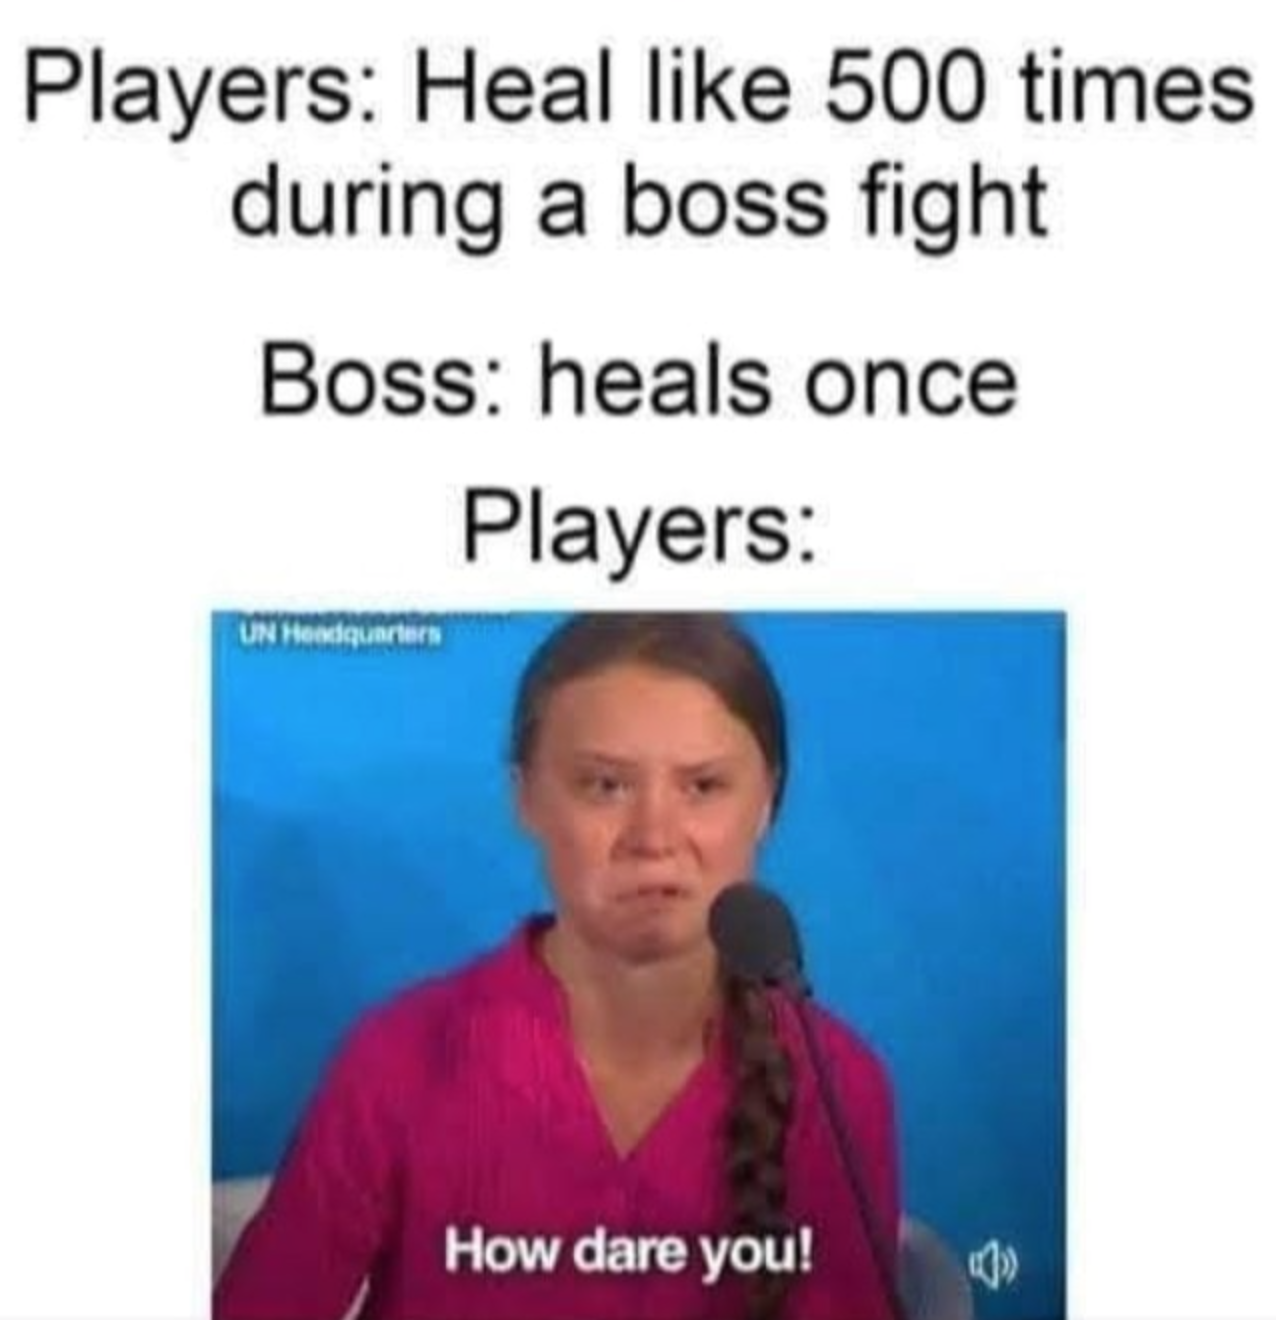 funny gaming memes - learning essentials - Players Heal 500 times during a boss fight Boss heals once Players Un Honduras How dare you!